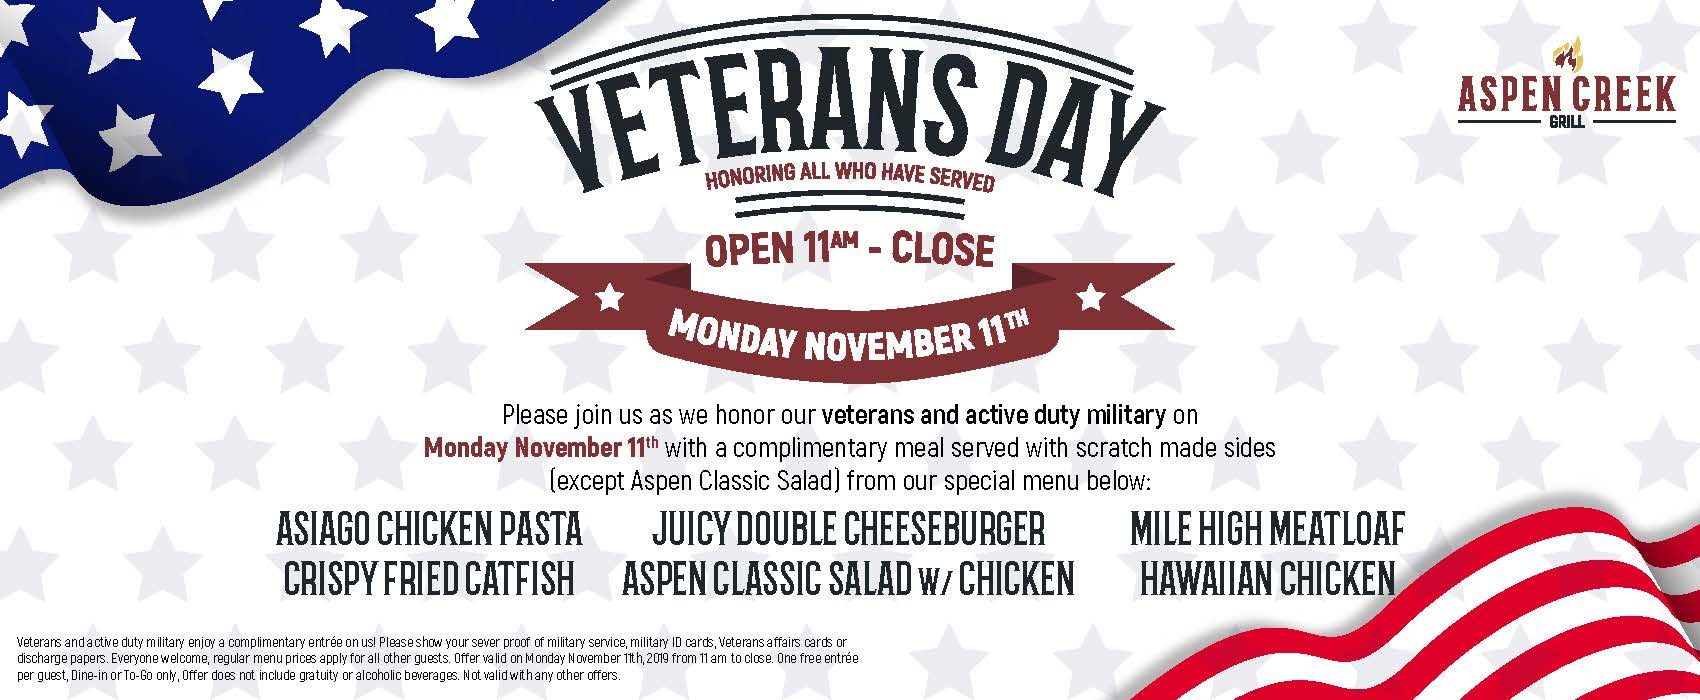 Aspen Creek Grill Honors Both Active-Duty and Veterans on Monday, November 11th with a Complimentary Meal